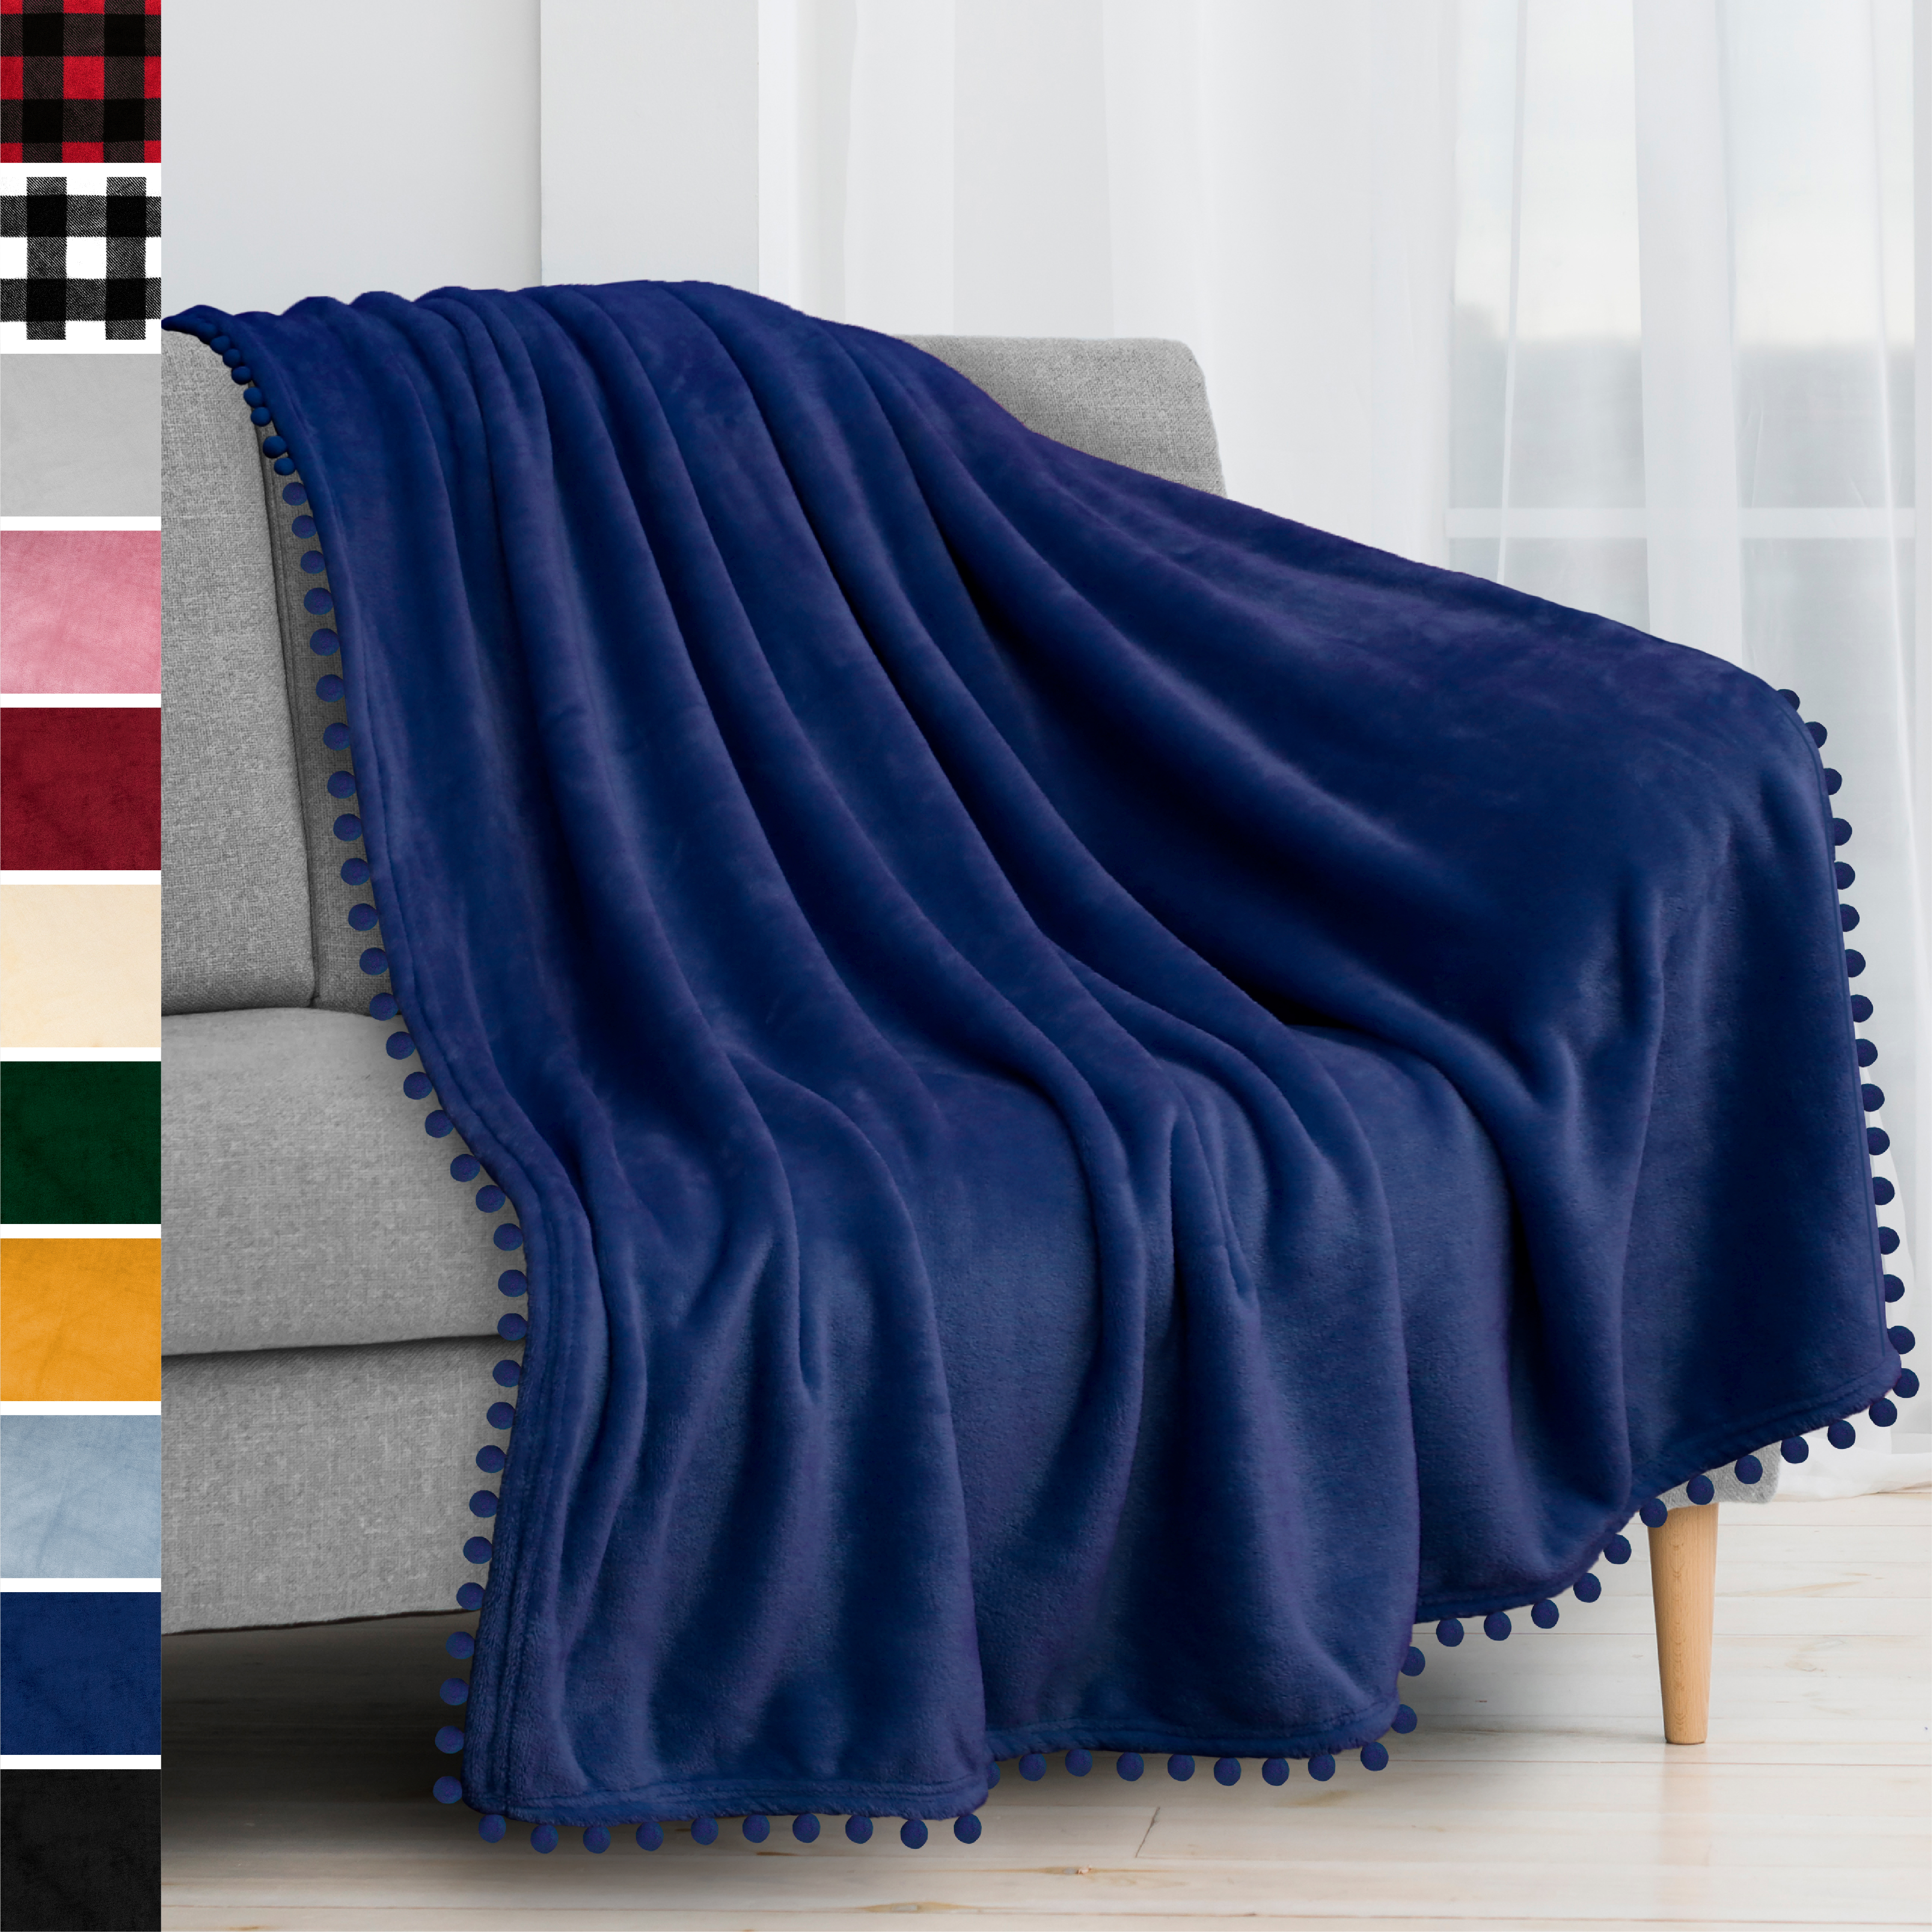 thumbnail 92 - Fleece Throw Blanket with Pom Pom Fringe Super Soft Lightweight Bed Couch Home